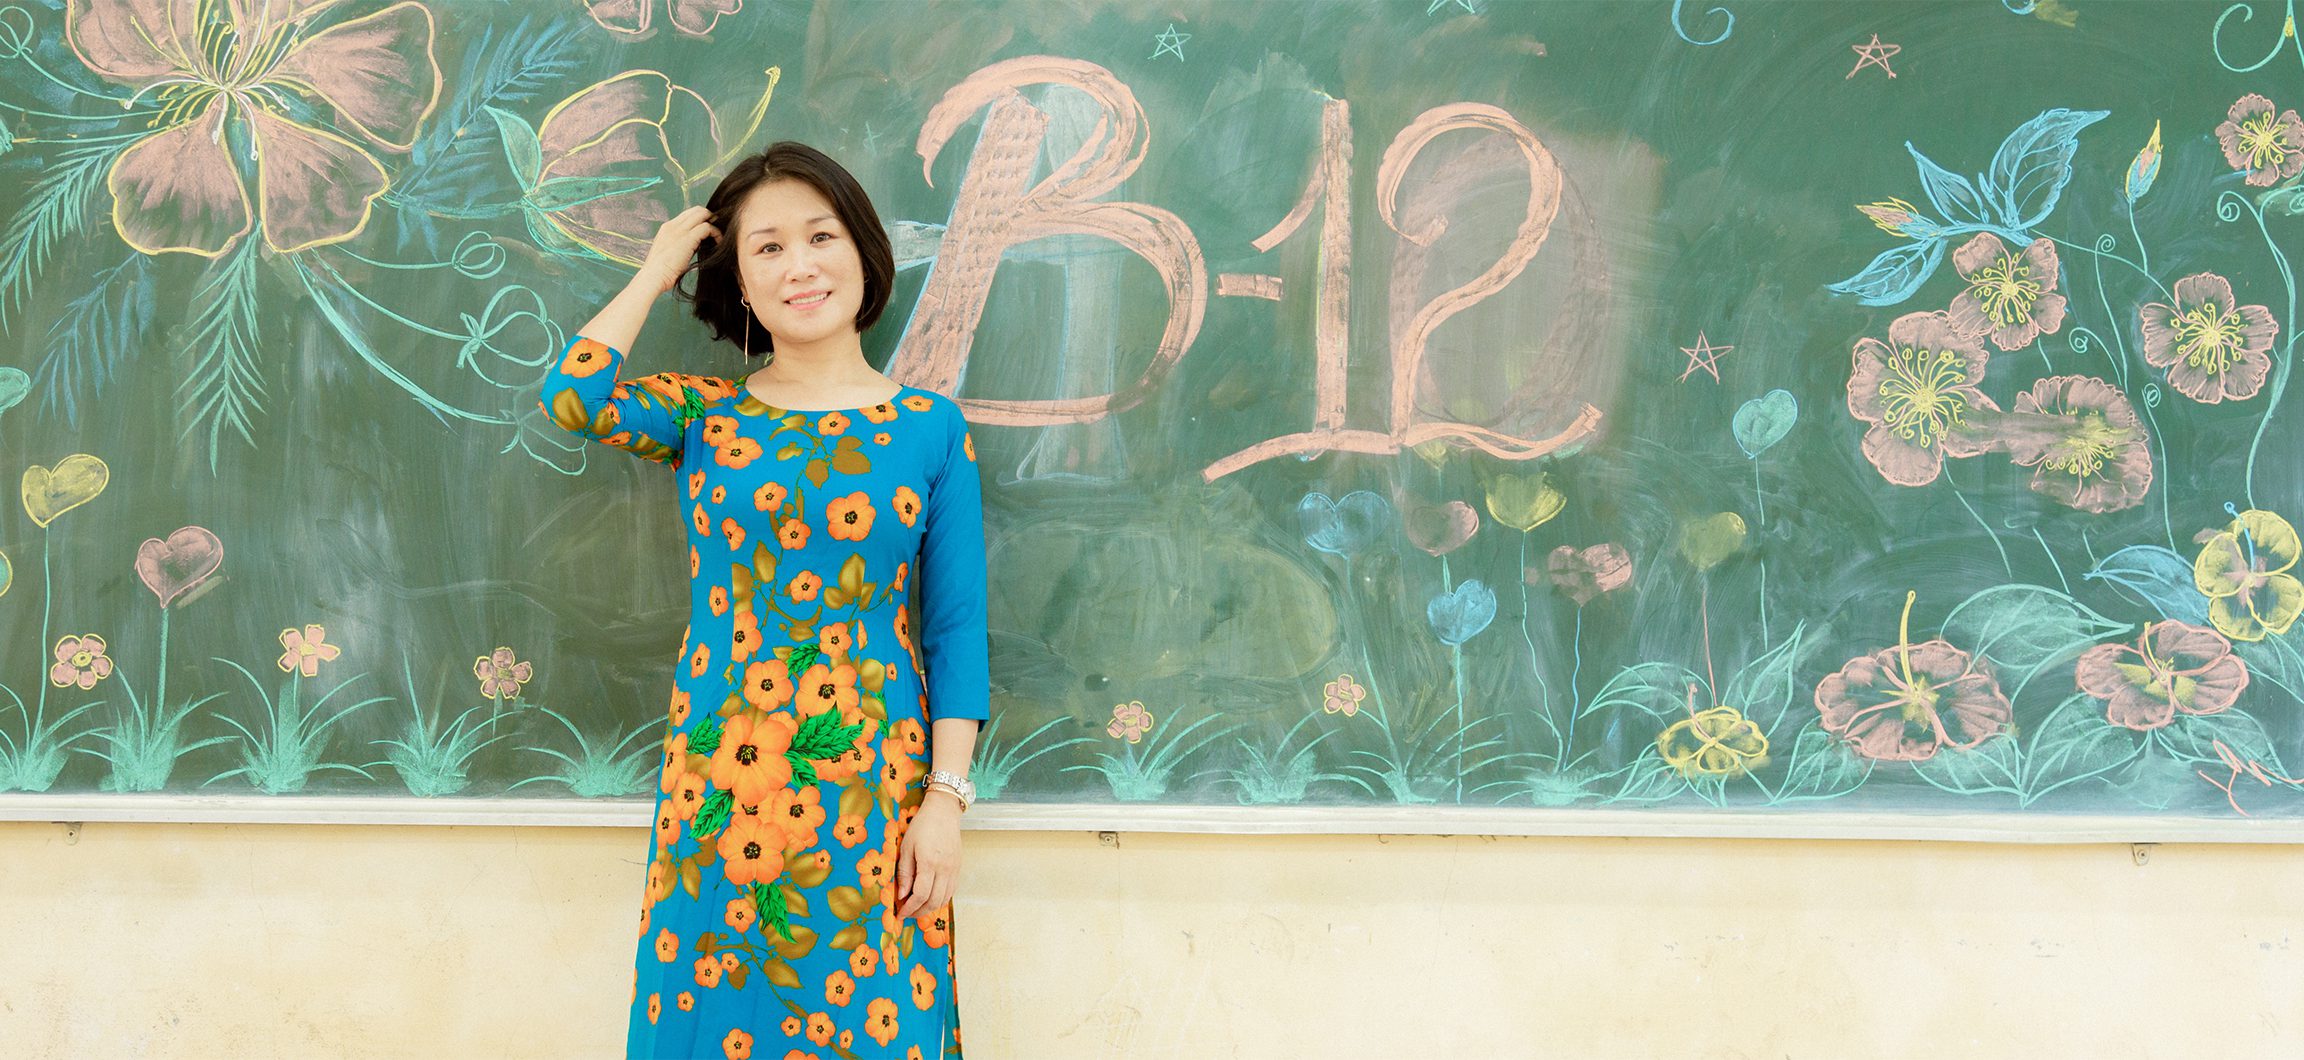 Pham Kim Ngoc stands in front of a chalkboard